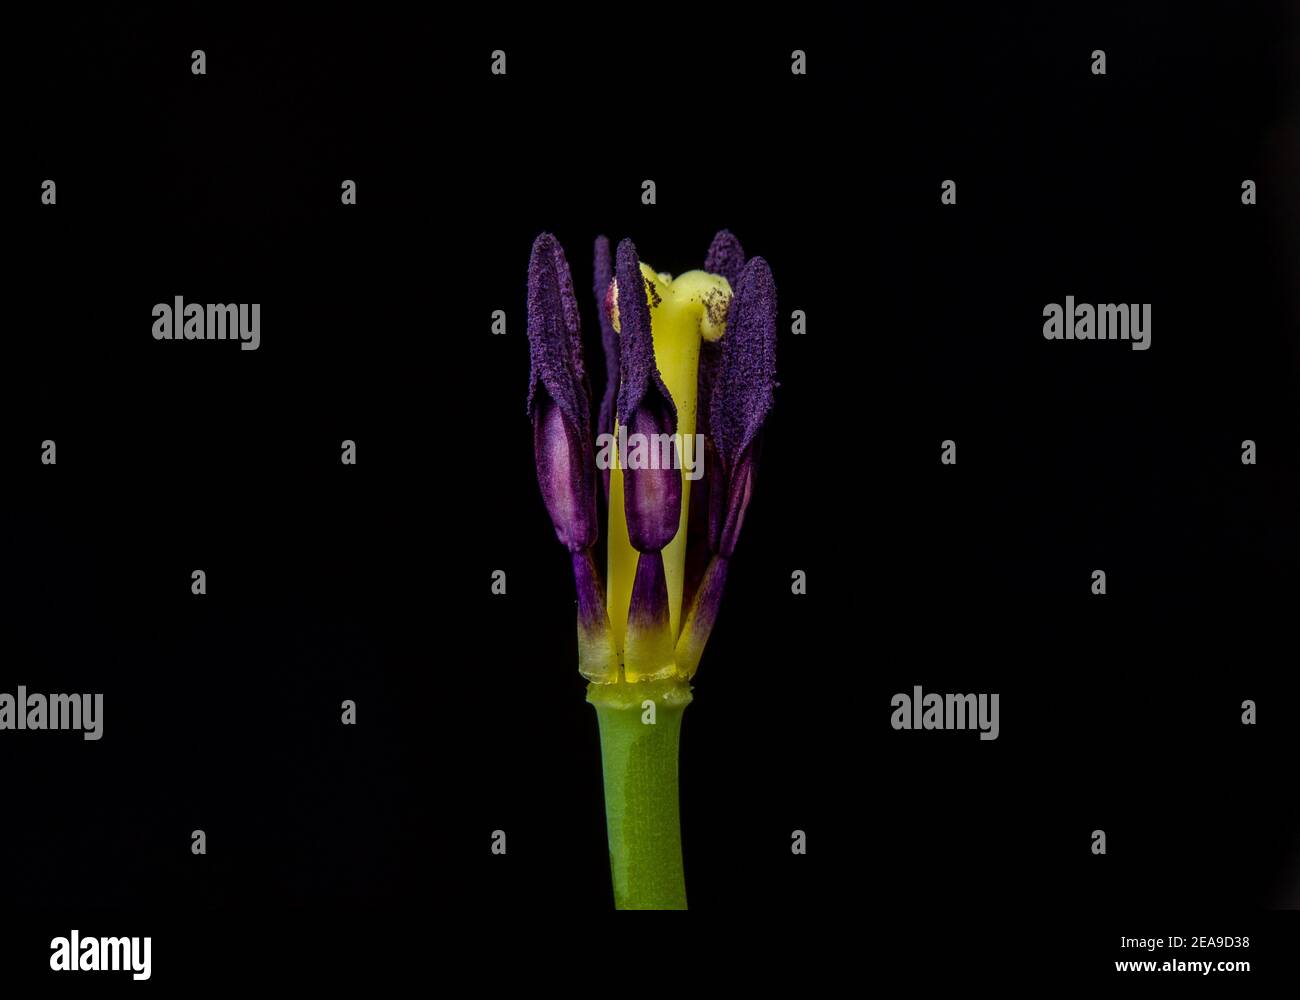 Closeup shot of purple tulip pistils isolated on a black background Stock Photo